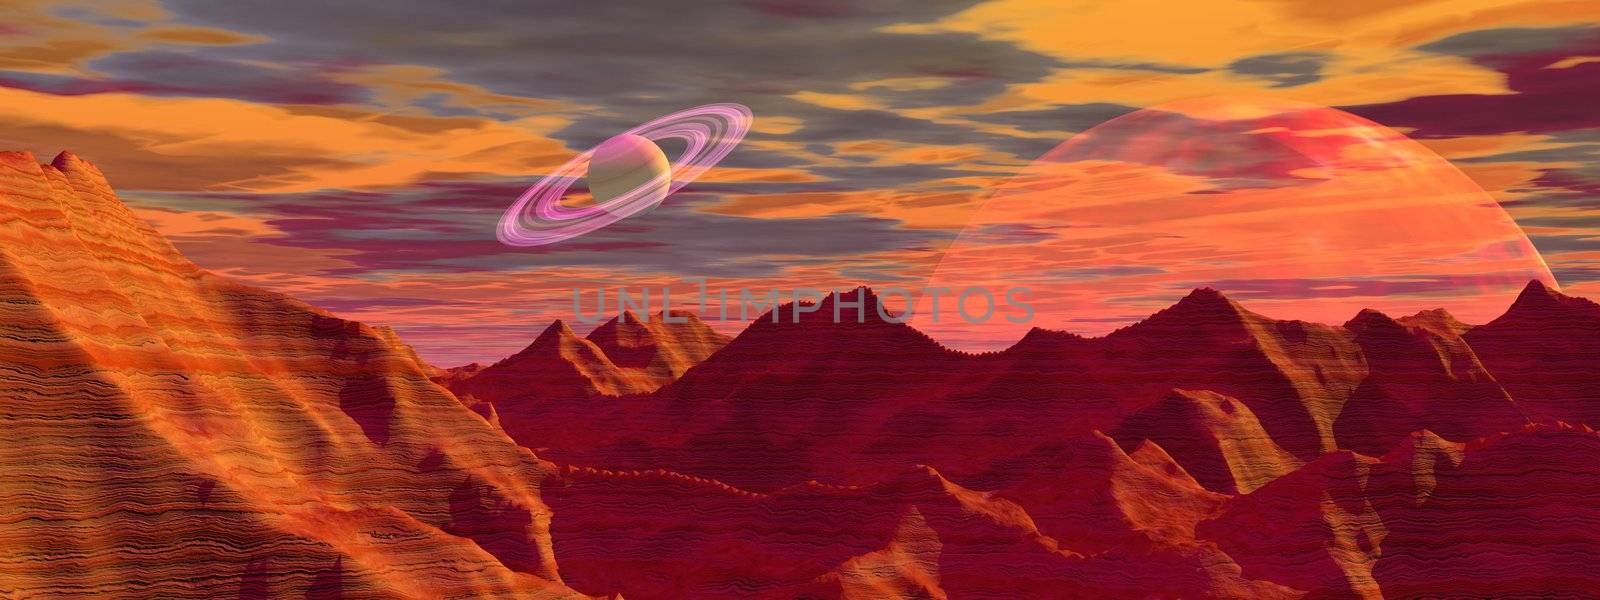 Red landscape with rock mountains and planets by cloudy sunset